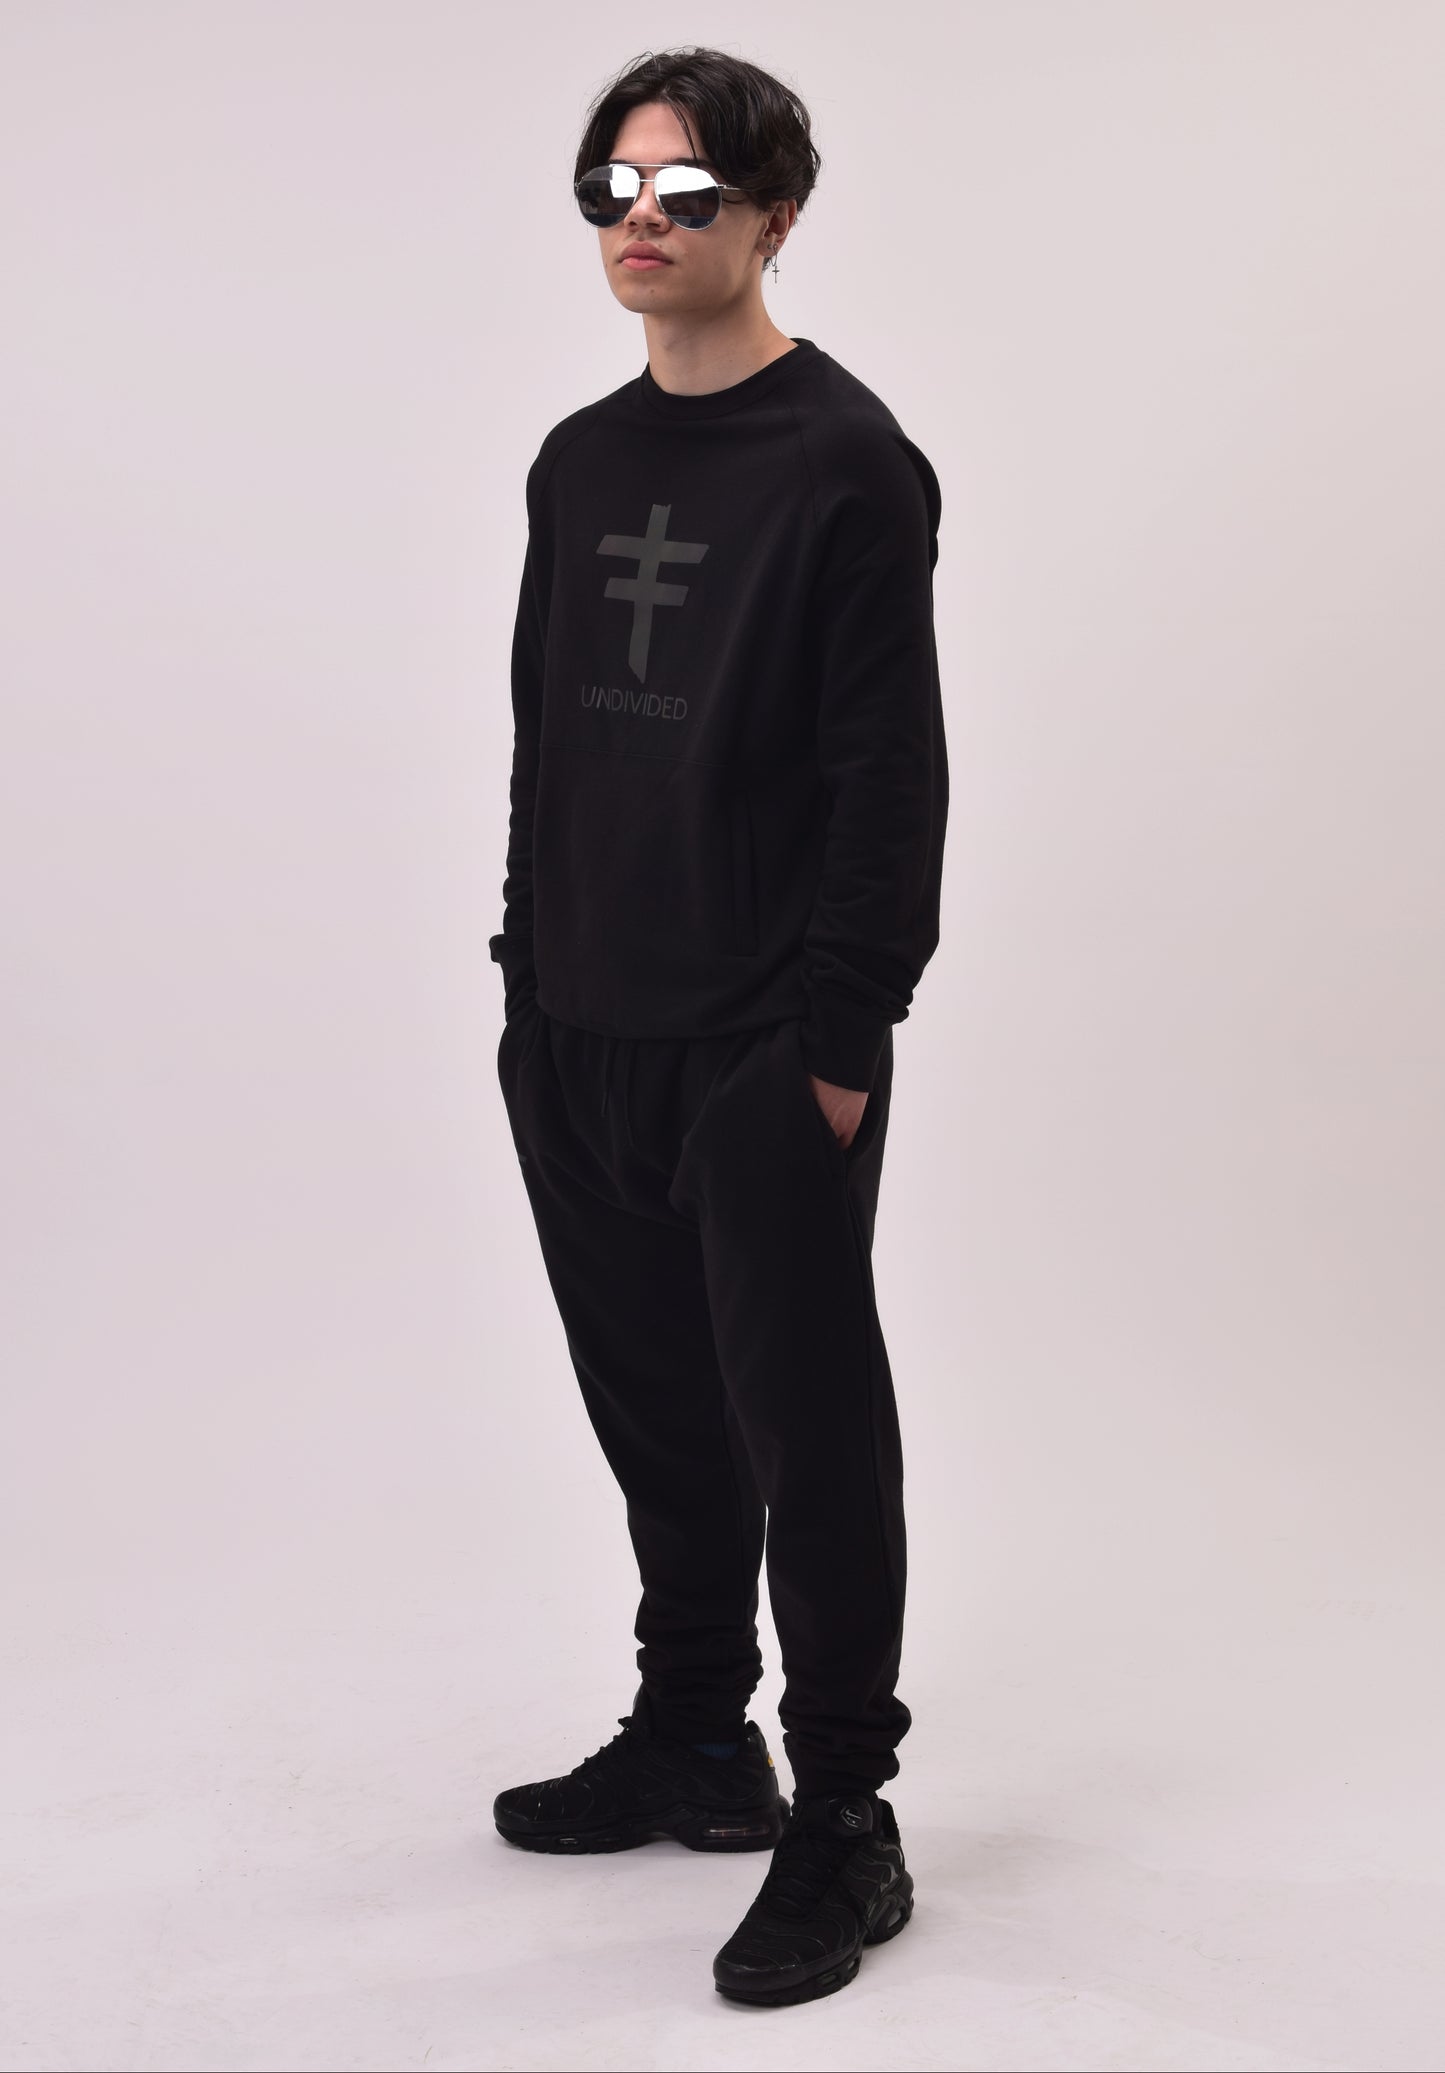 UNDIVIDED Black Sweat Top Tracksuit With  Reflective Print (Unisex)